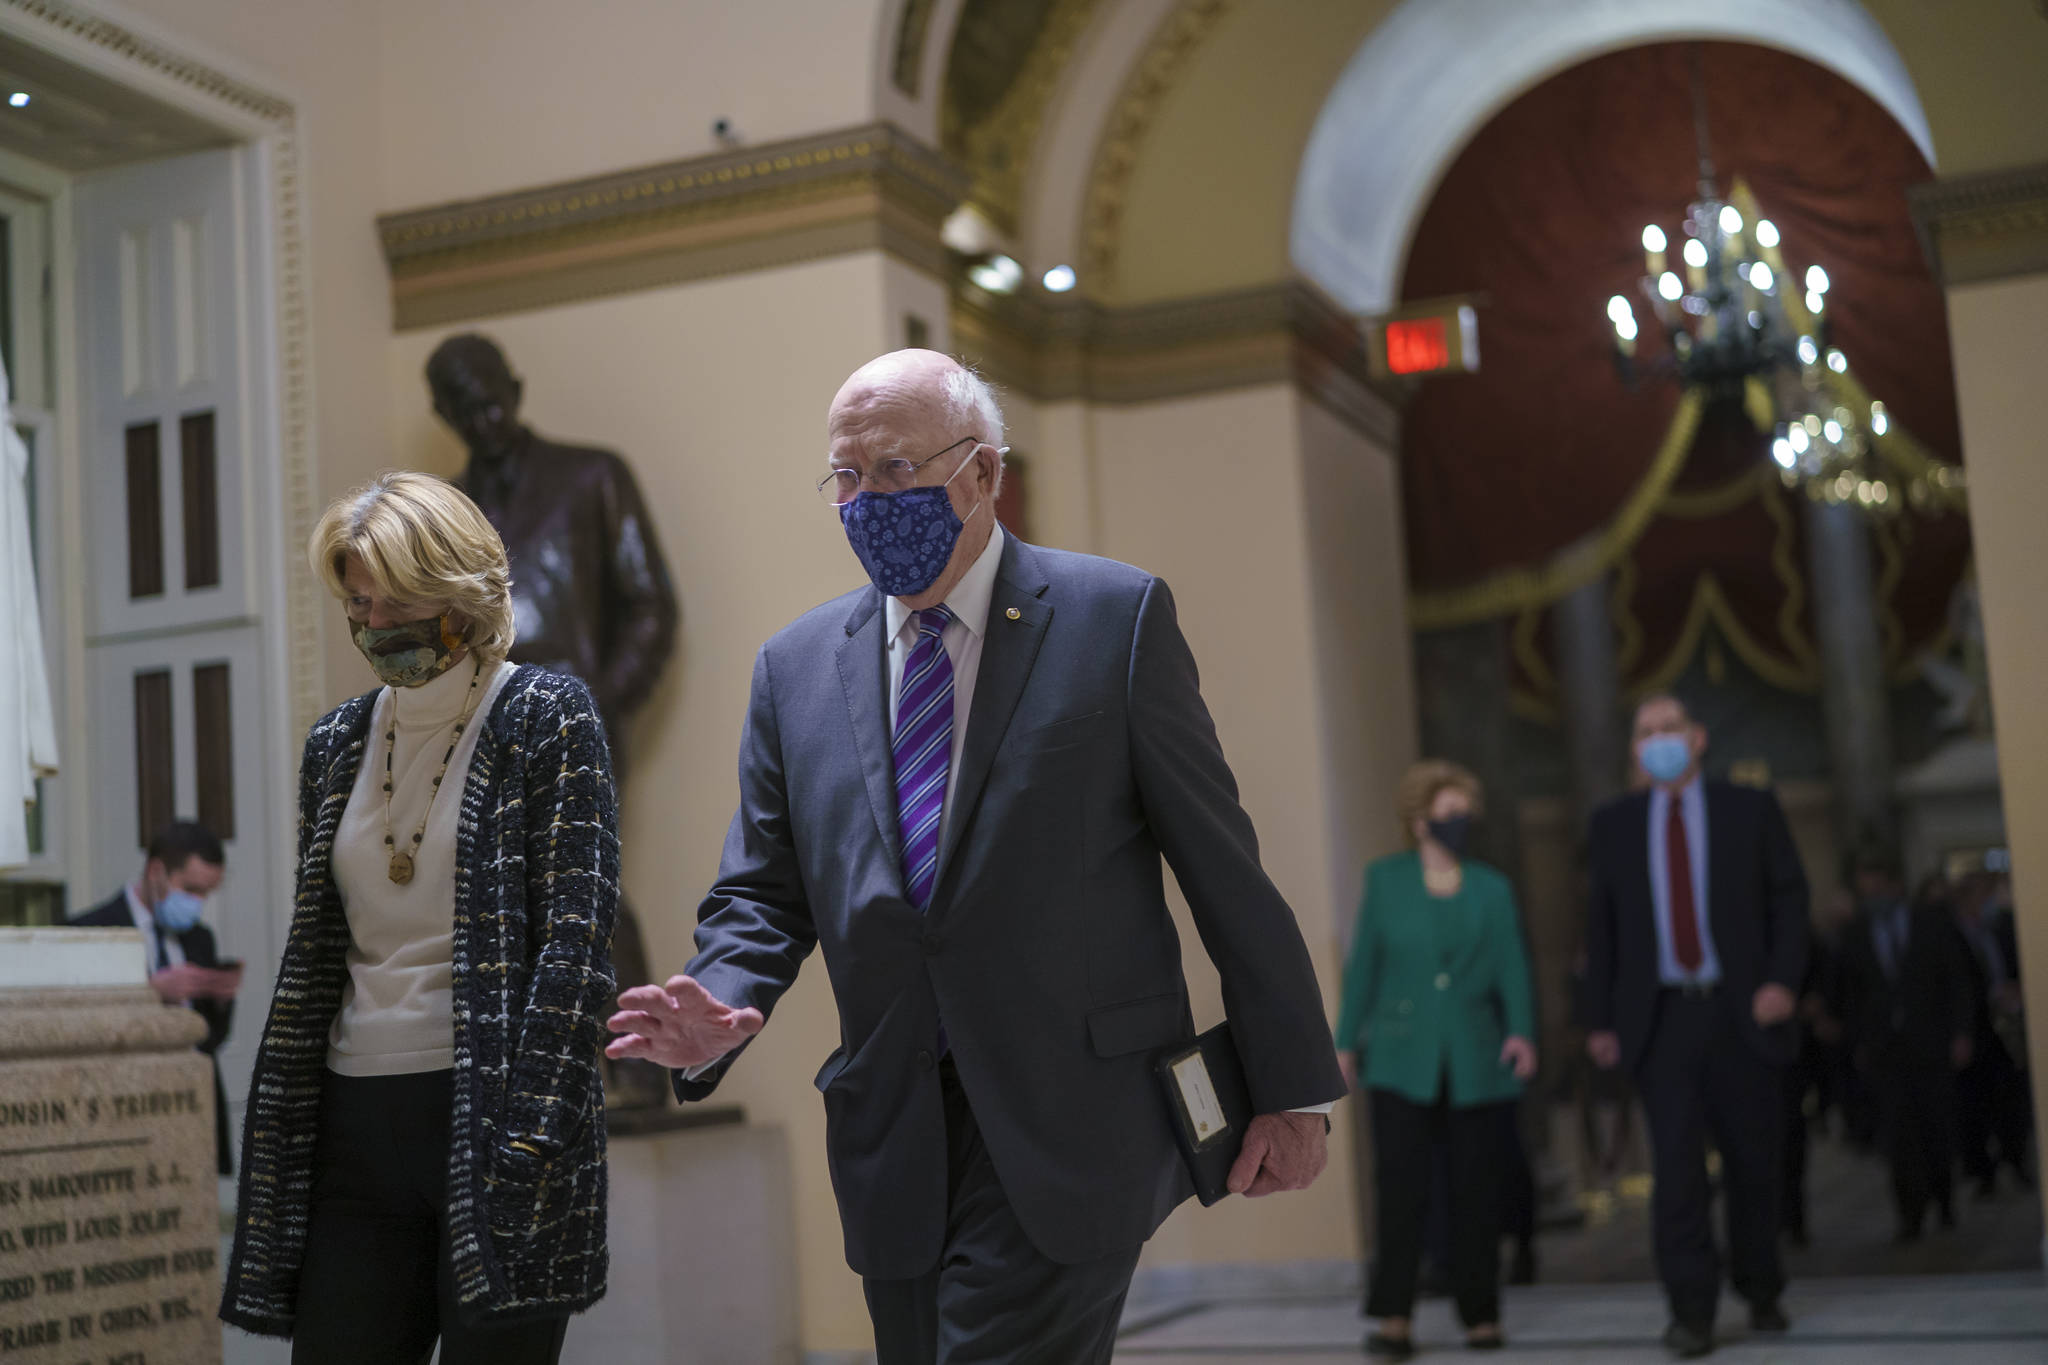 U.S. Sen. Lisa Murkowski, R-Alaska, left, and Sen. Patrick Leahy, D-Vermont, join other senators as they return to the House chamber to continue a joint session of the House and Senate and count the Electoral College votes on Jan. 6. (AP Photo/J. Scott Applewhite)